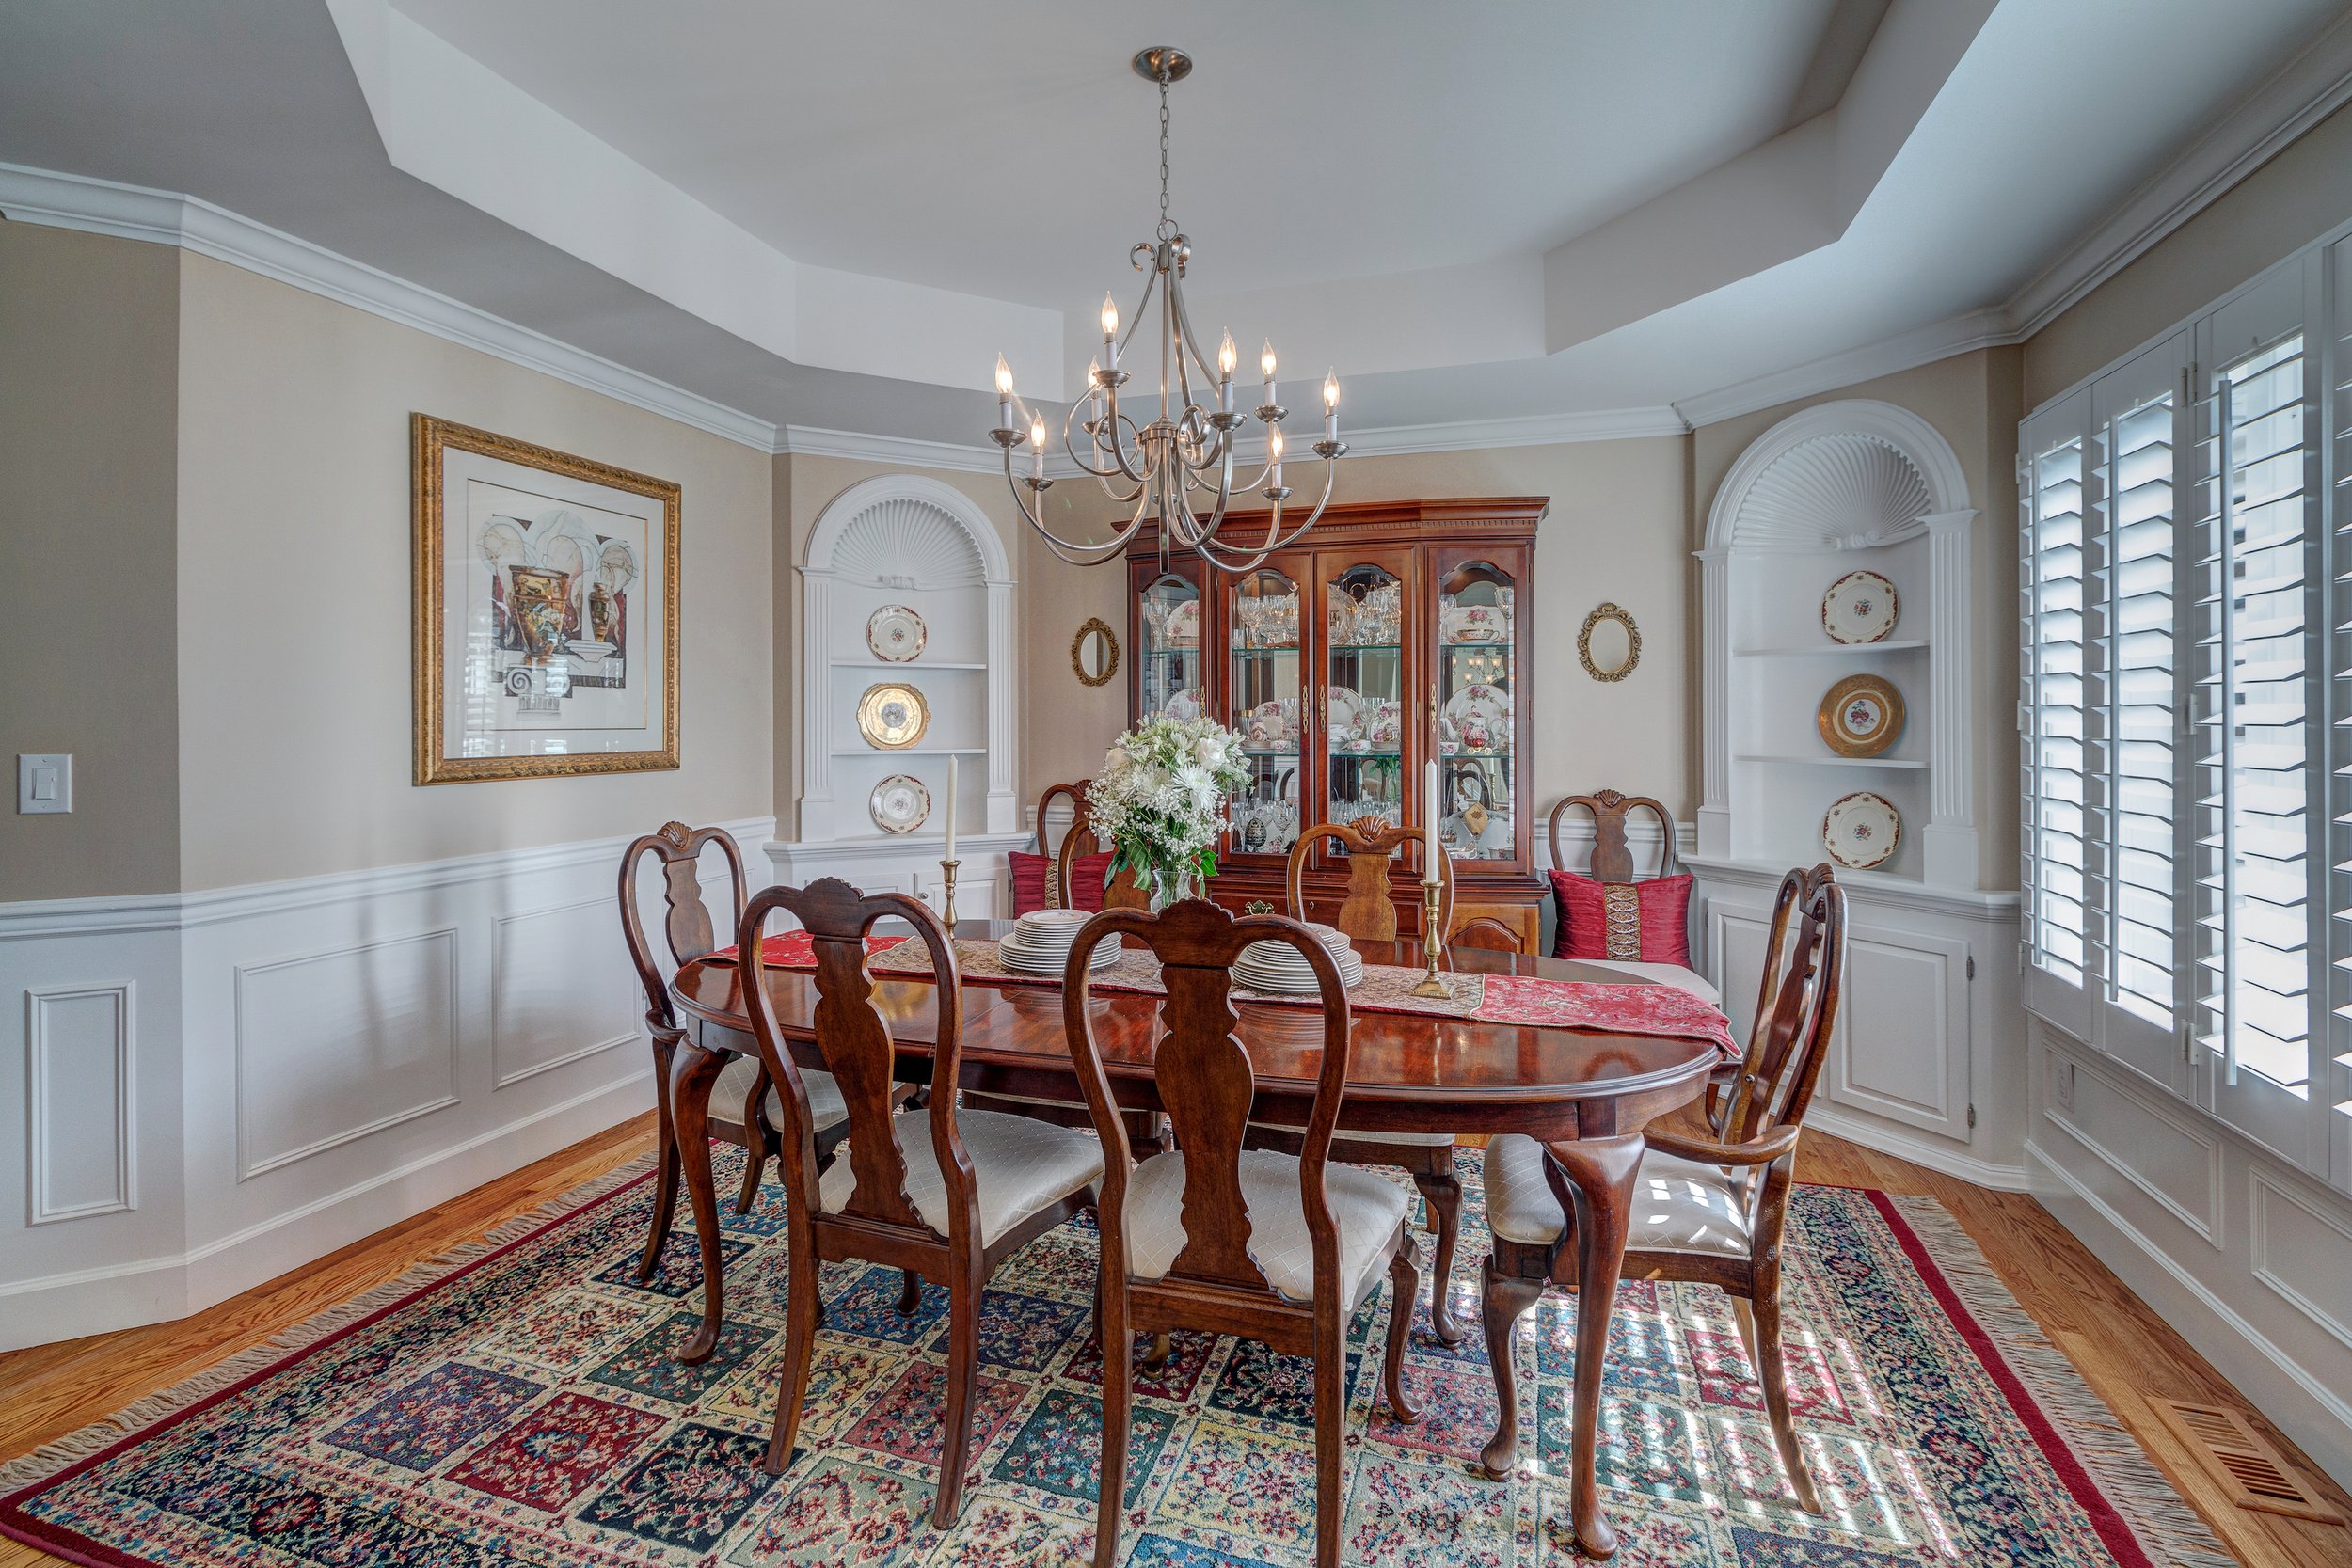 11-Formal dining room w wainscoting coved ceiling + corner built-ins.jpg